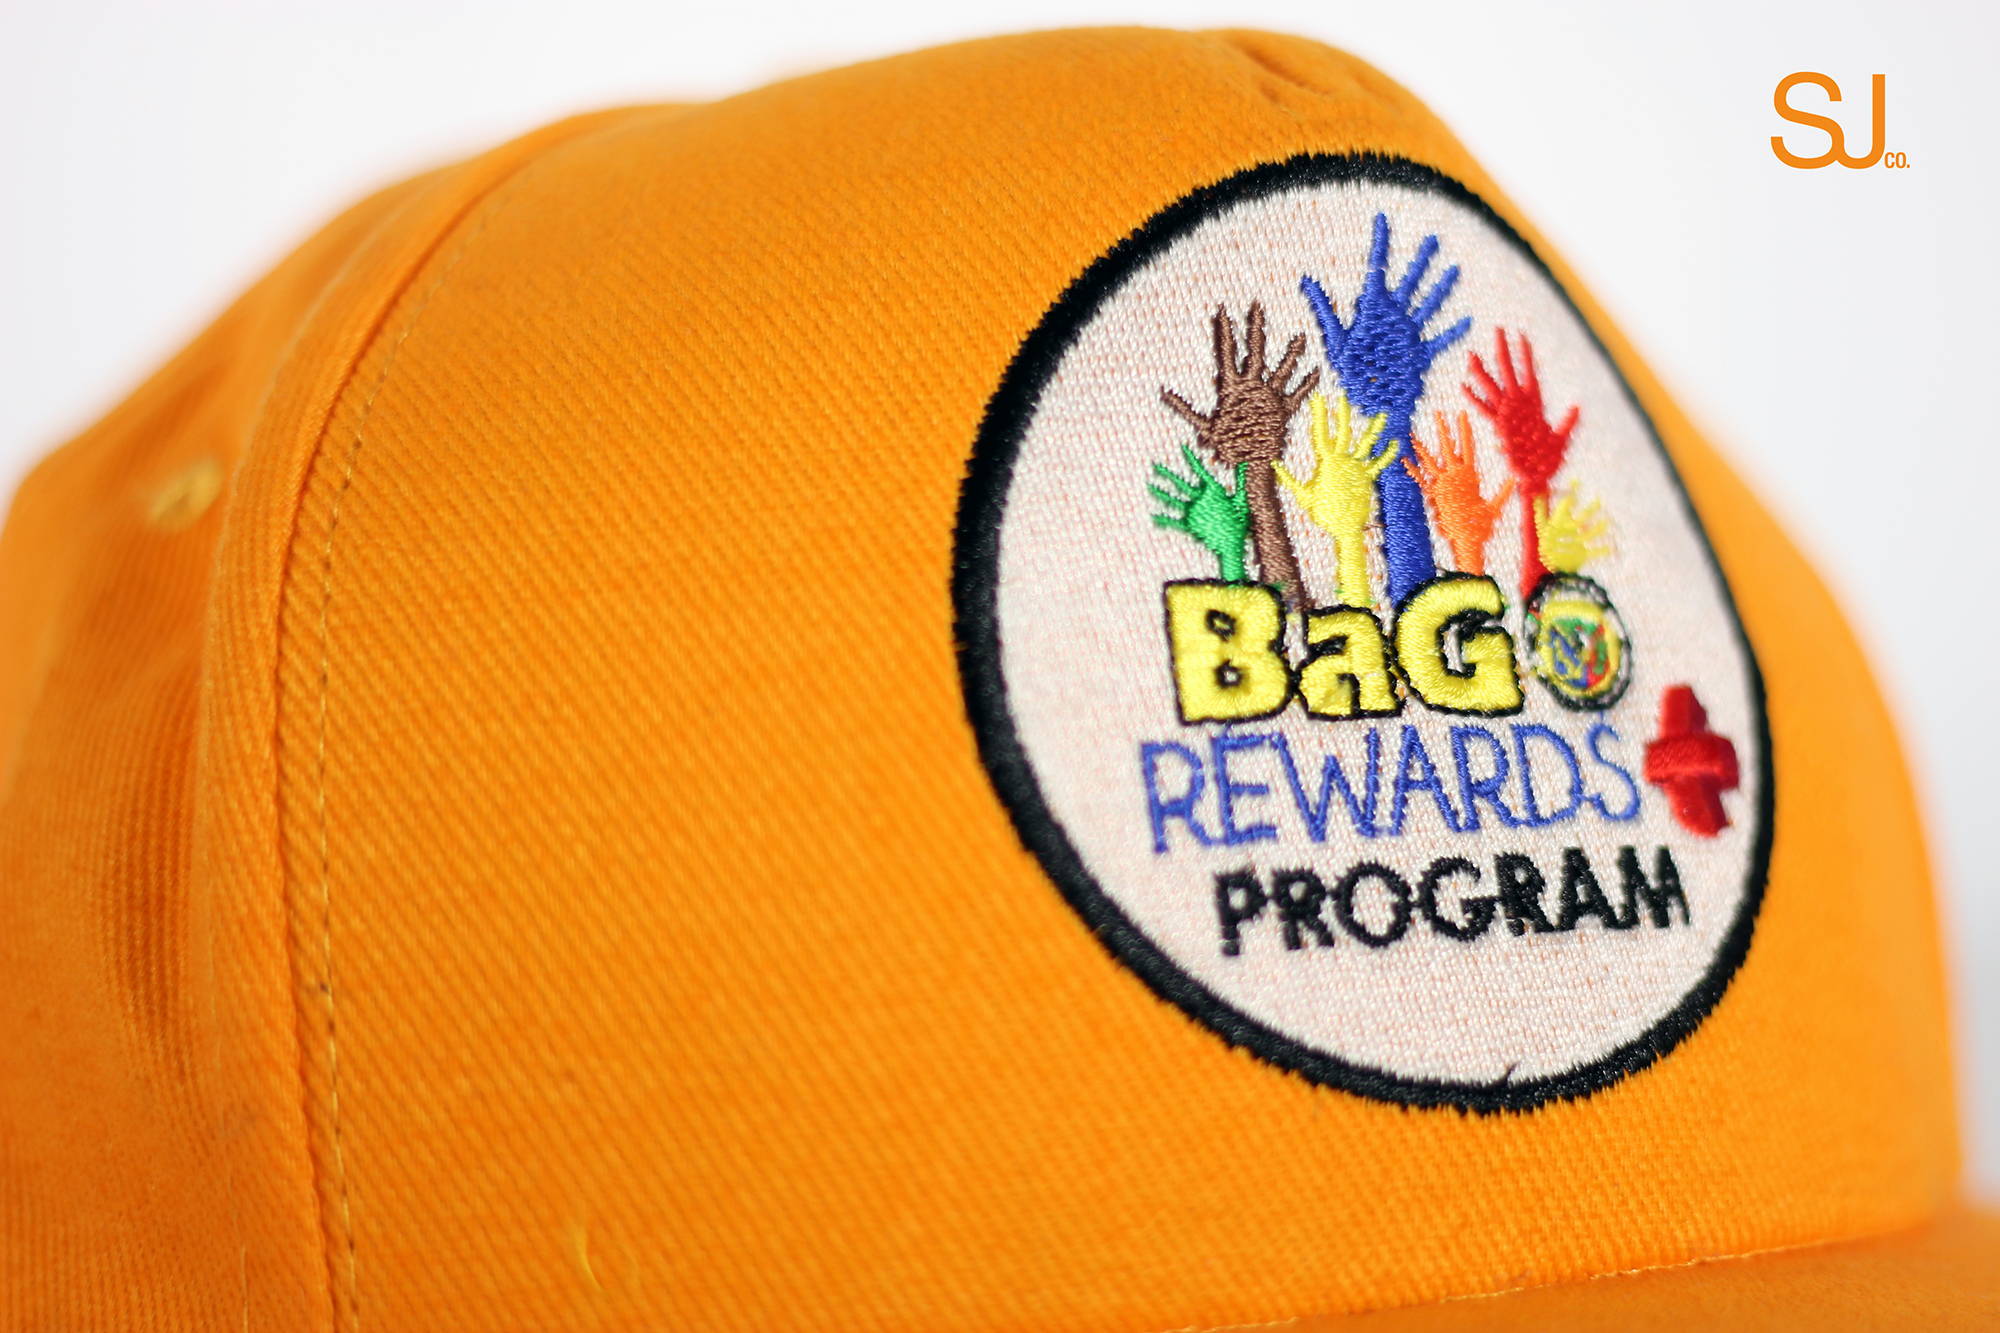 Bago city client digital embroidery on yellow cap